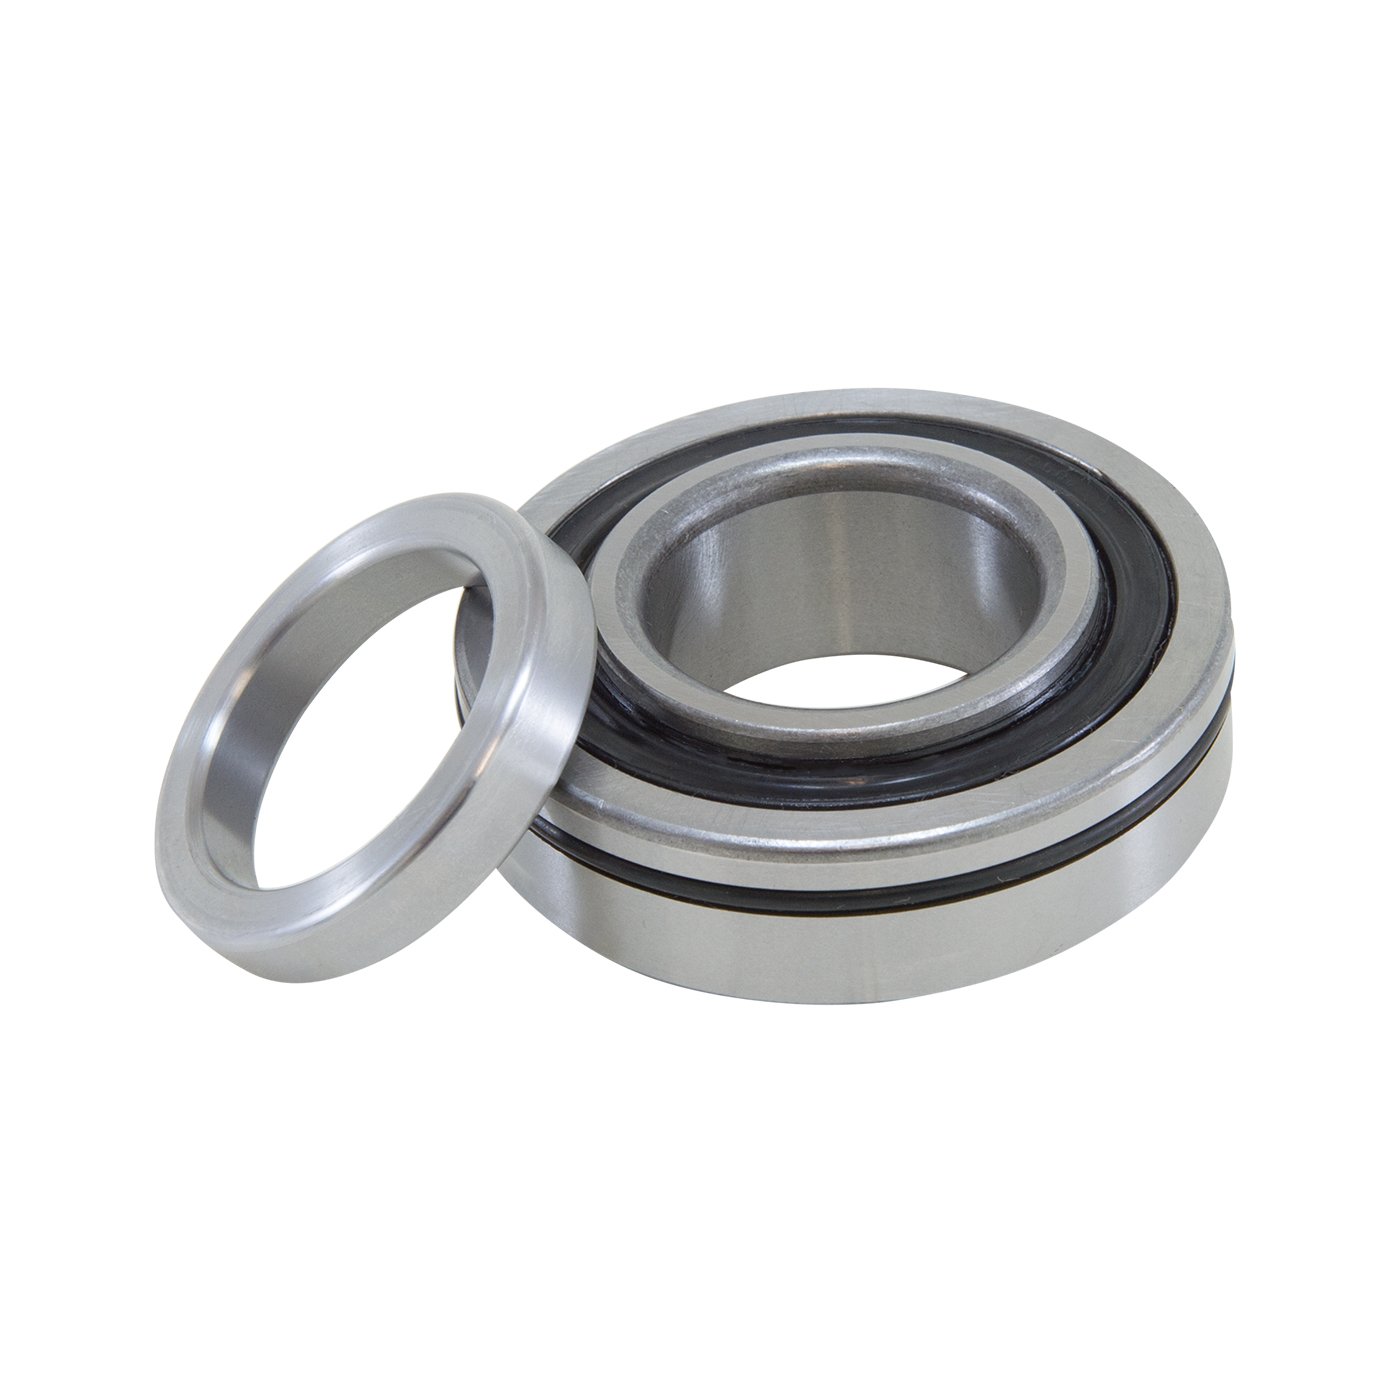 Cj Sealed Axle Bearing For Model 20